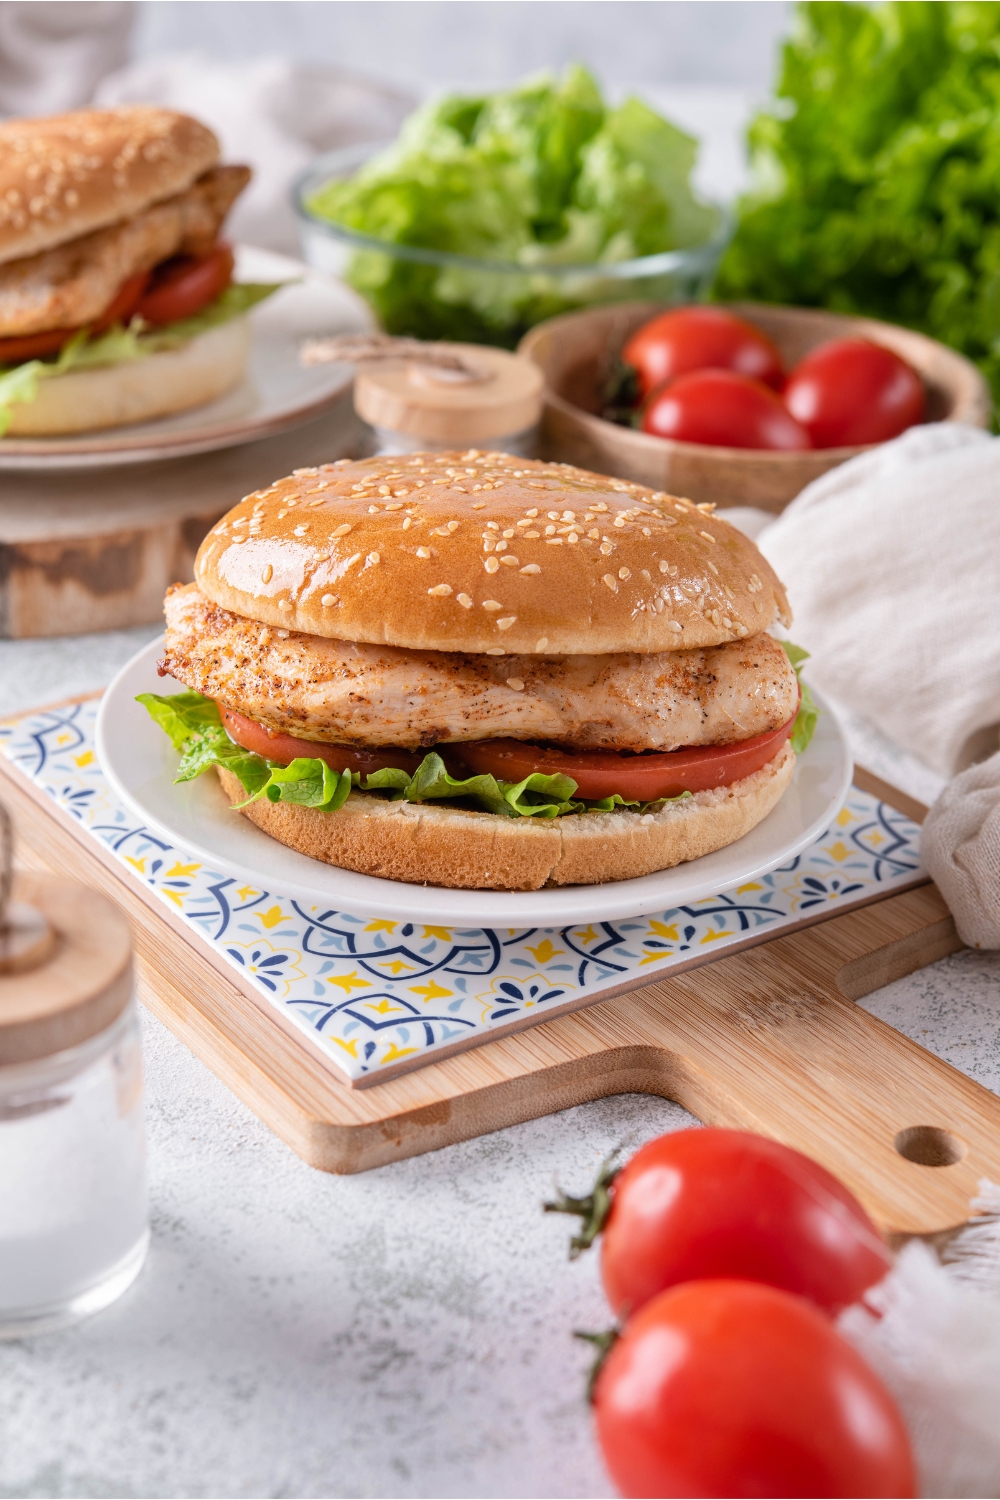 A grilled chicken sandwich with lettuce and sliced tomatoes on a sesame seed bun. The sandwich is on a white plate atop a decorative serving tray and there is a second sandwich in the background.